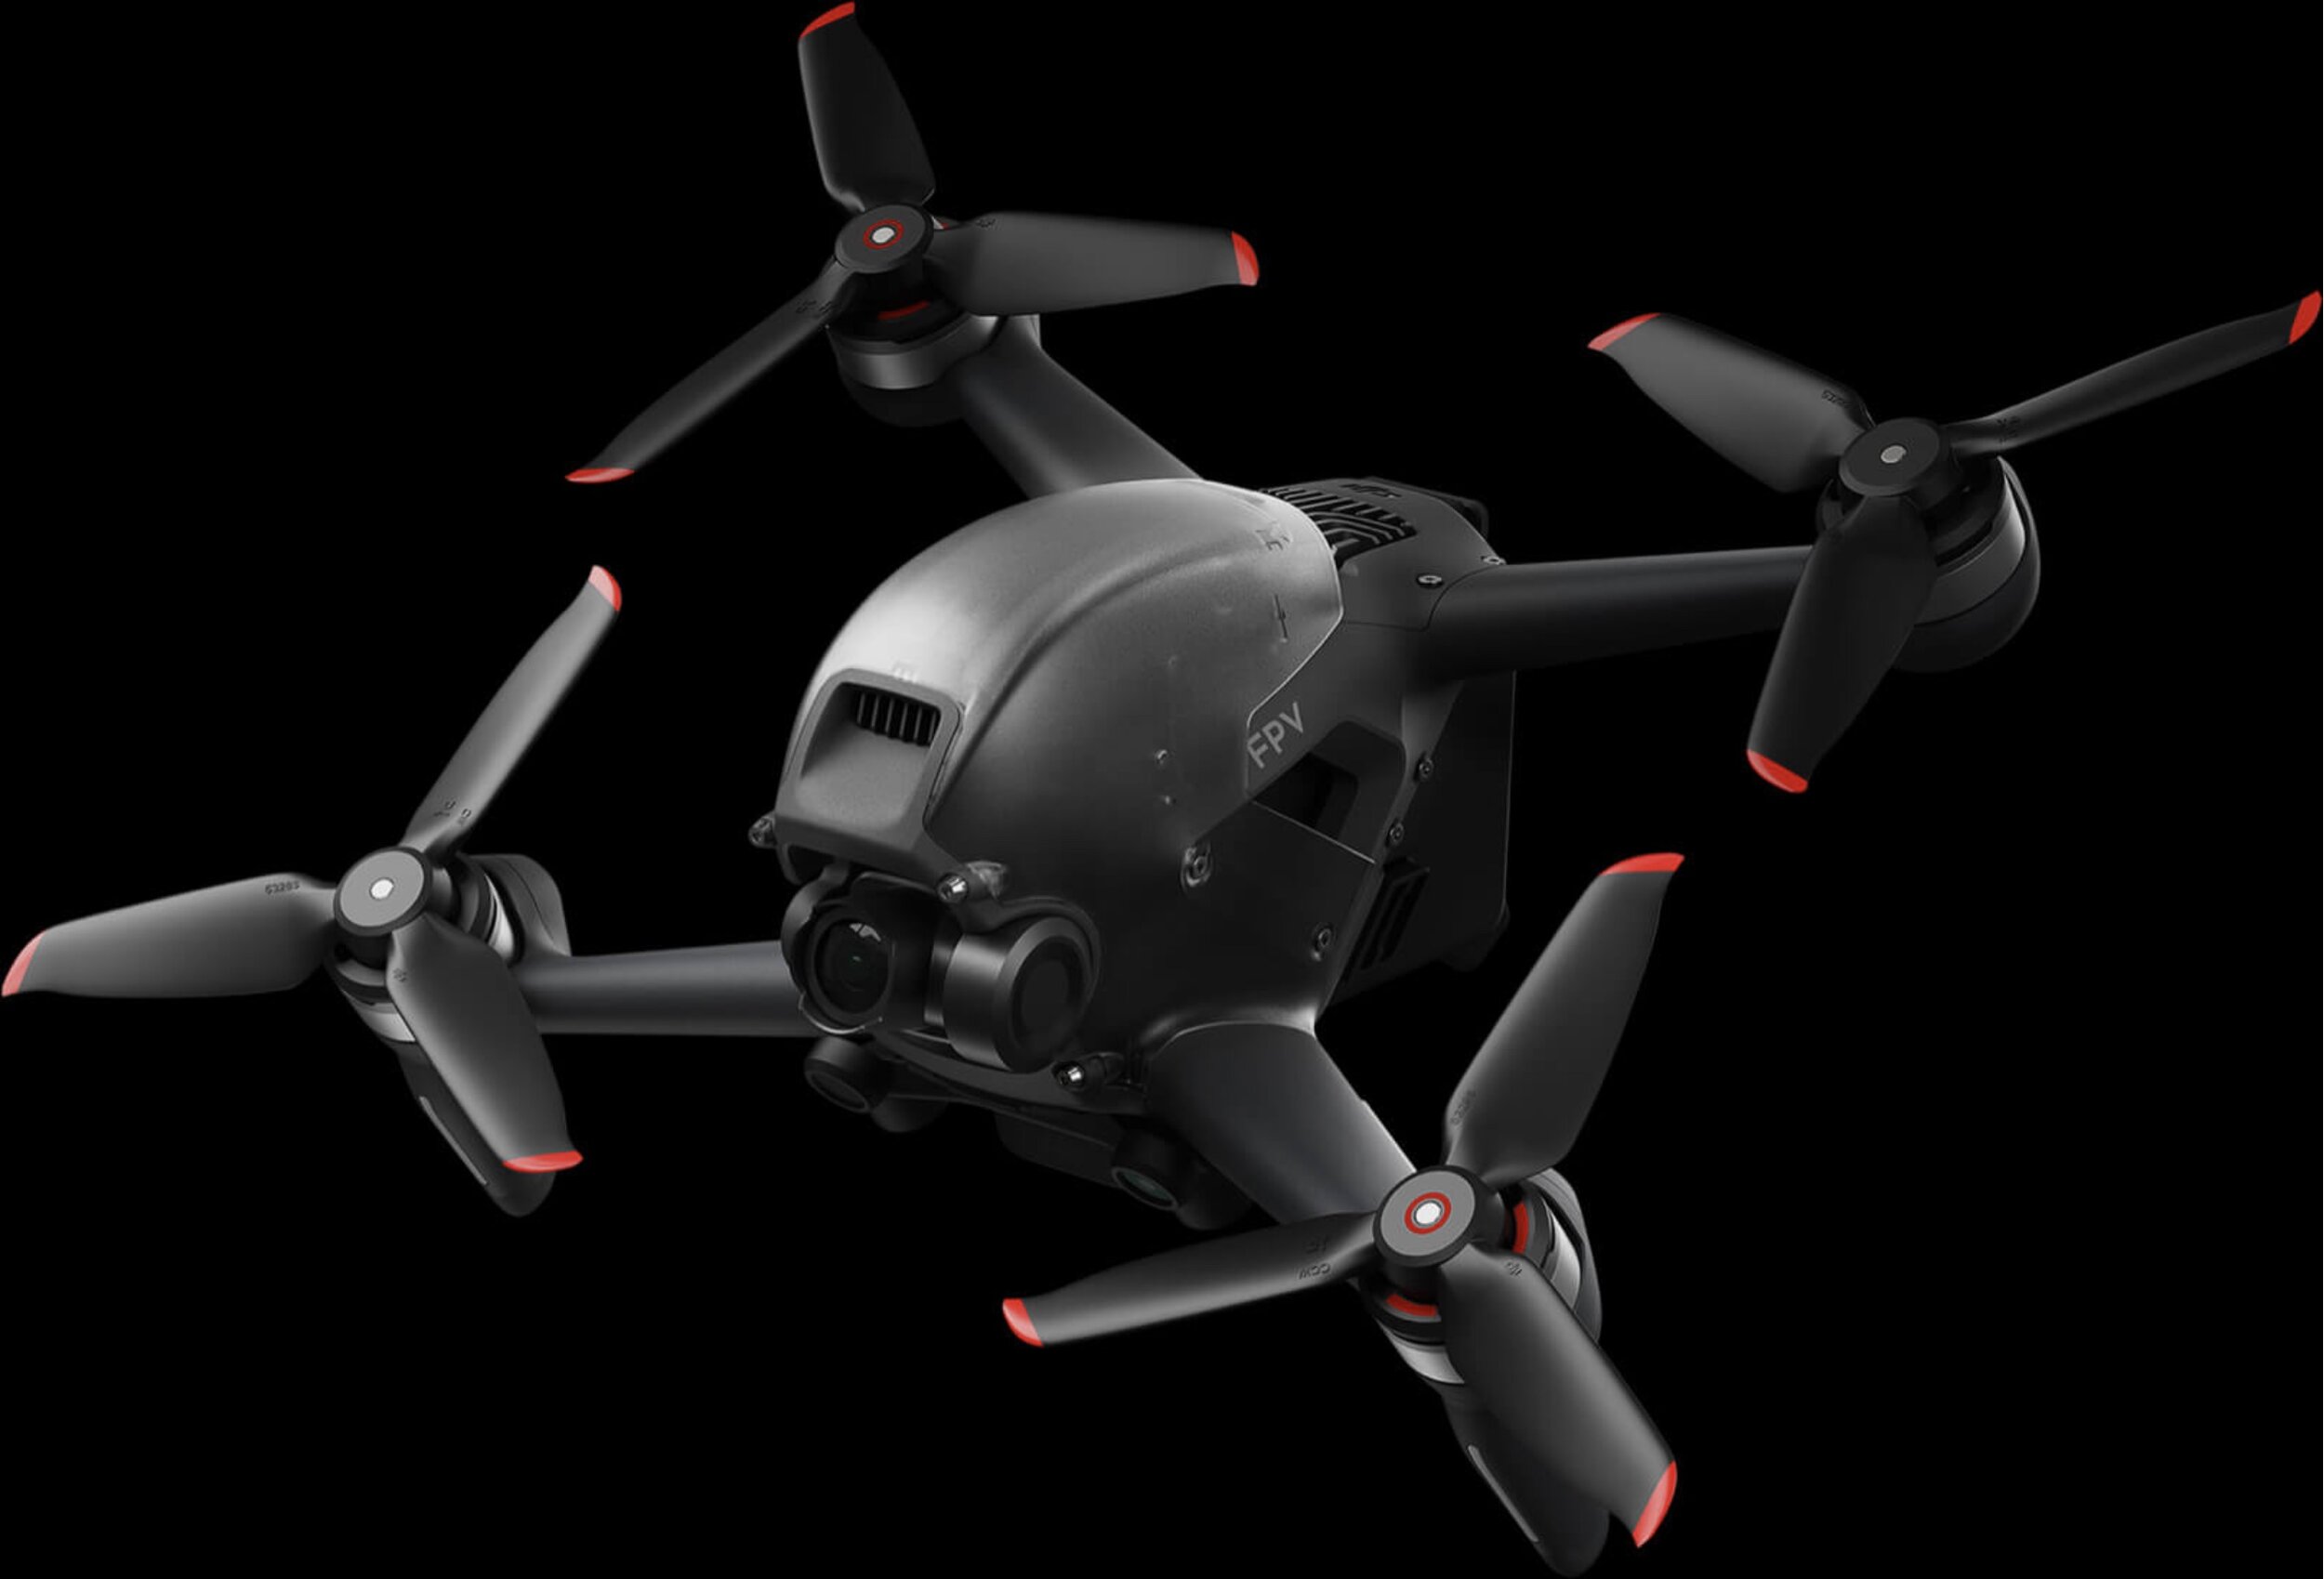 DJI gets pilots immersed in the action with FPV racing drone